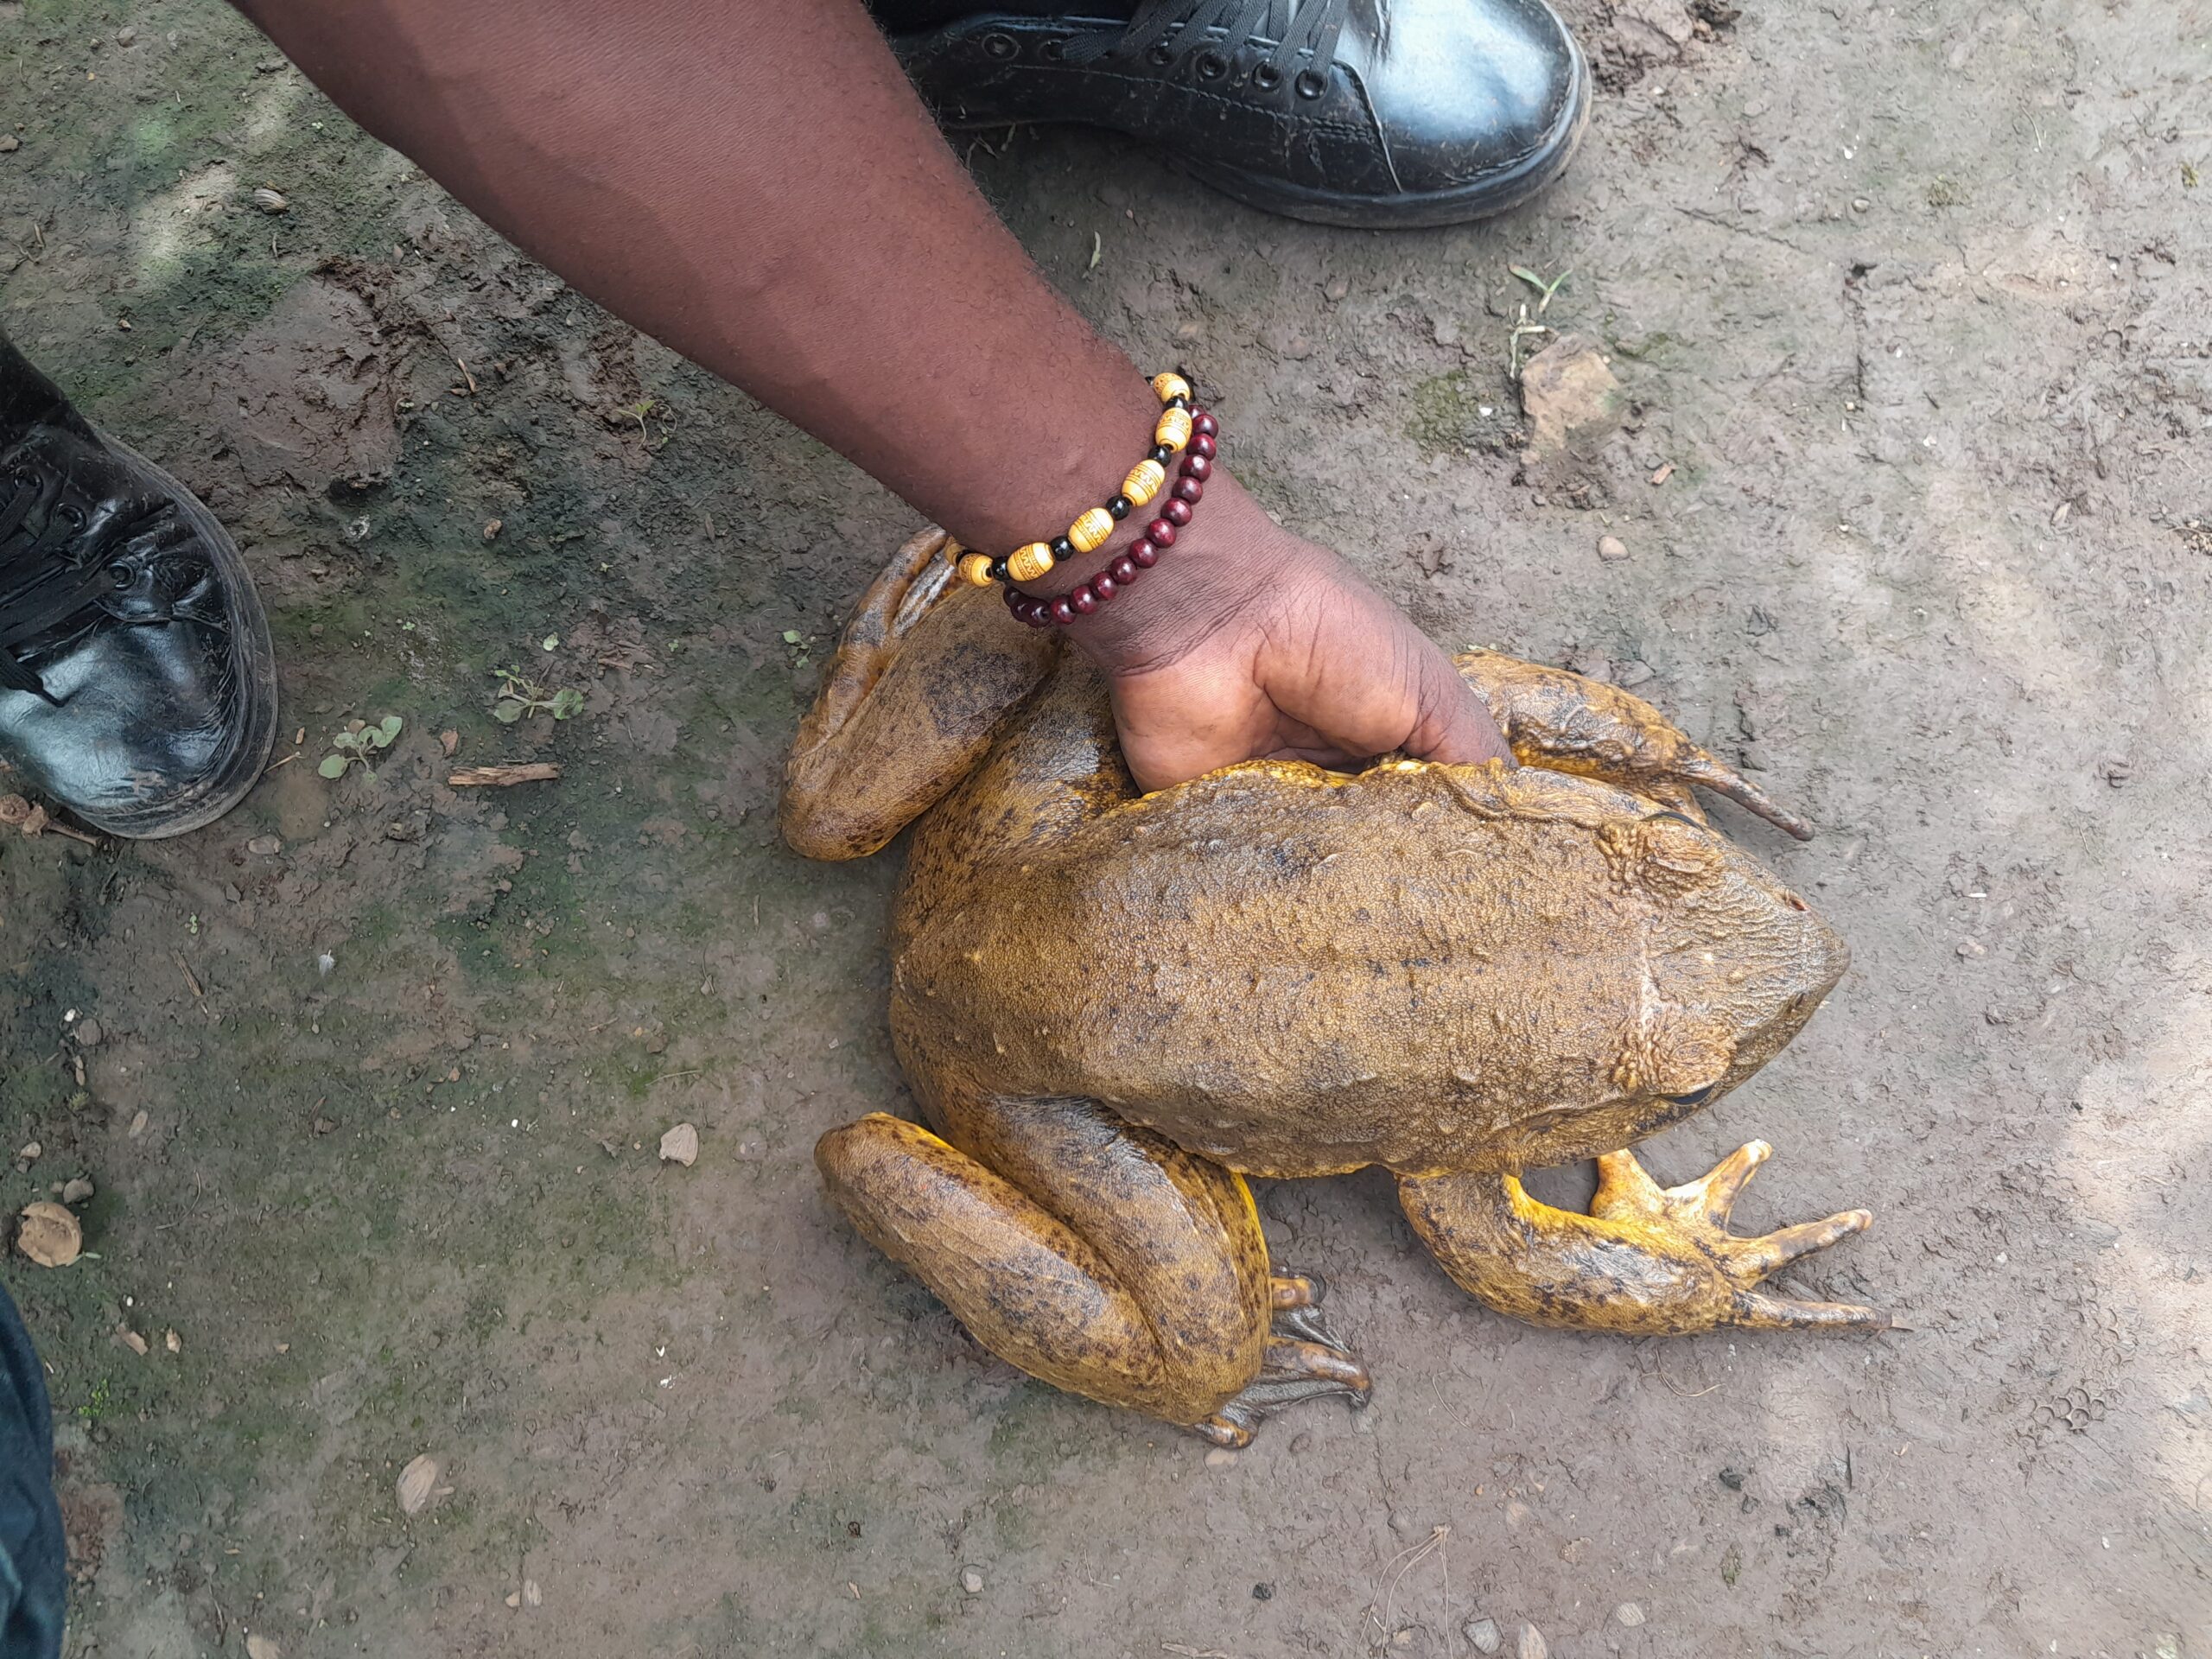 Engaging community to save the Goliath Frog